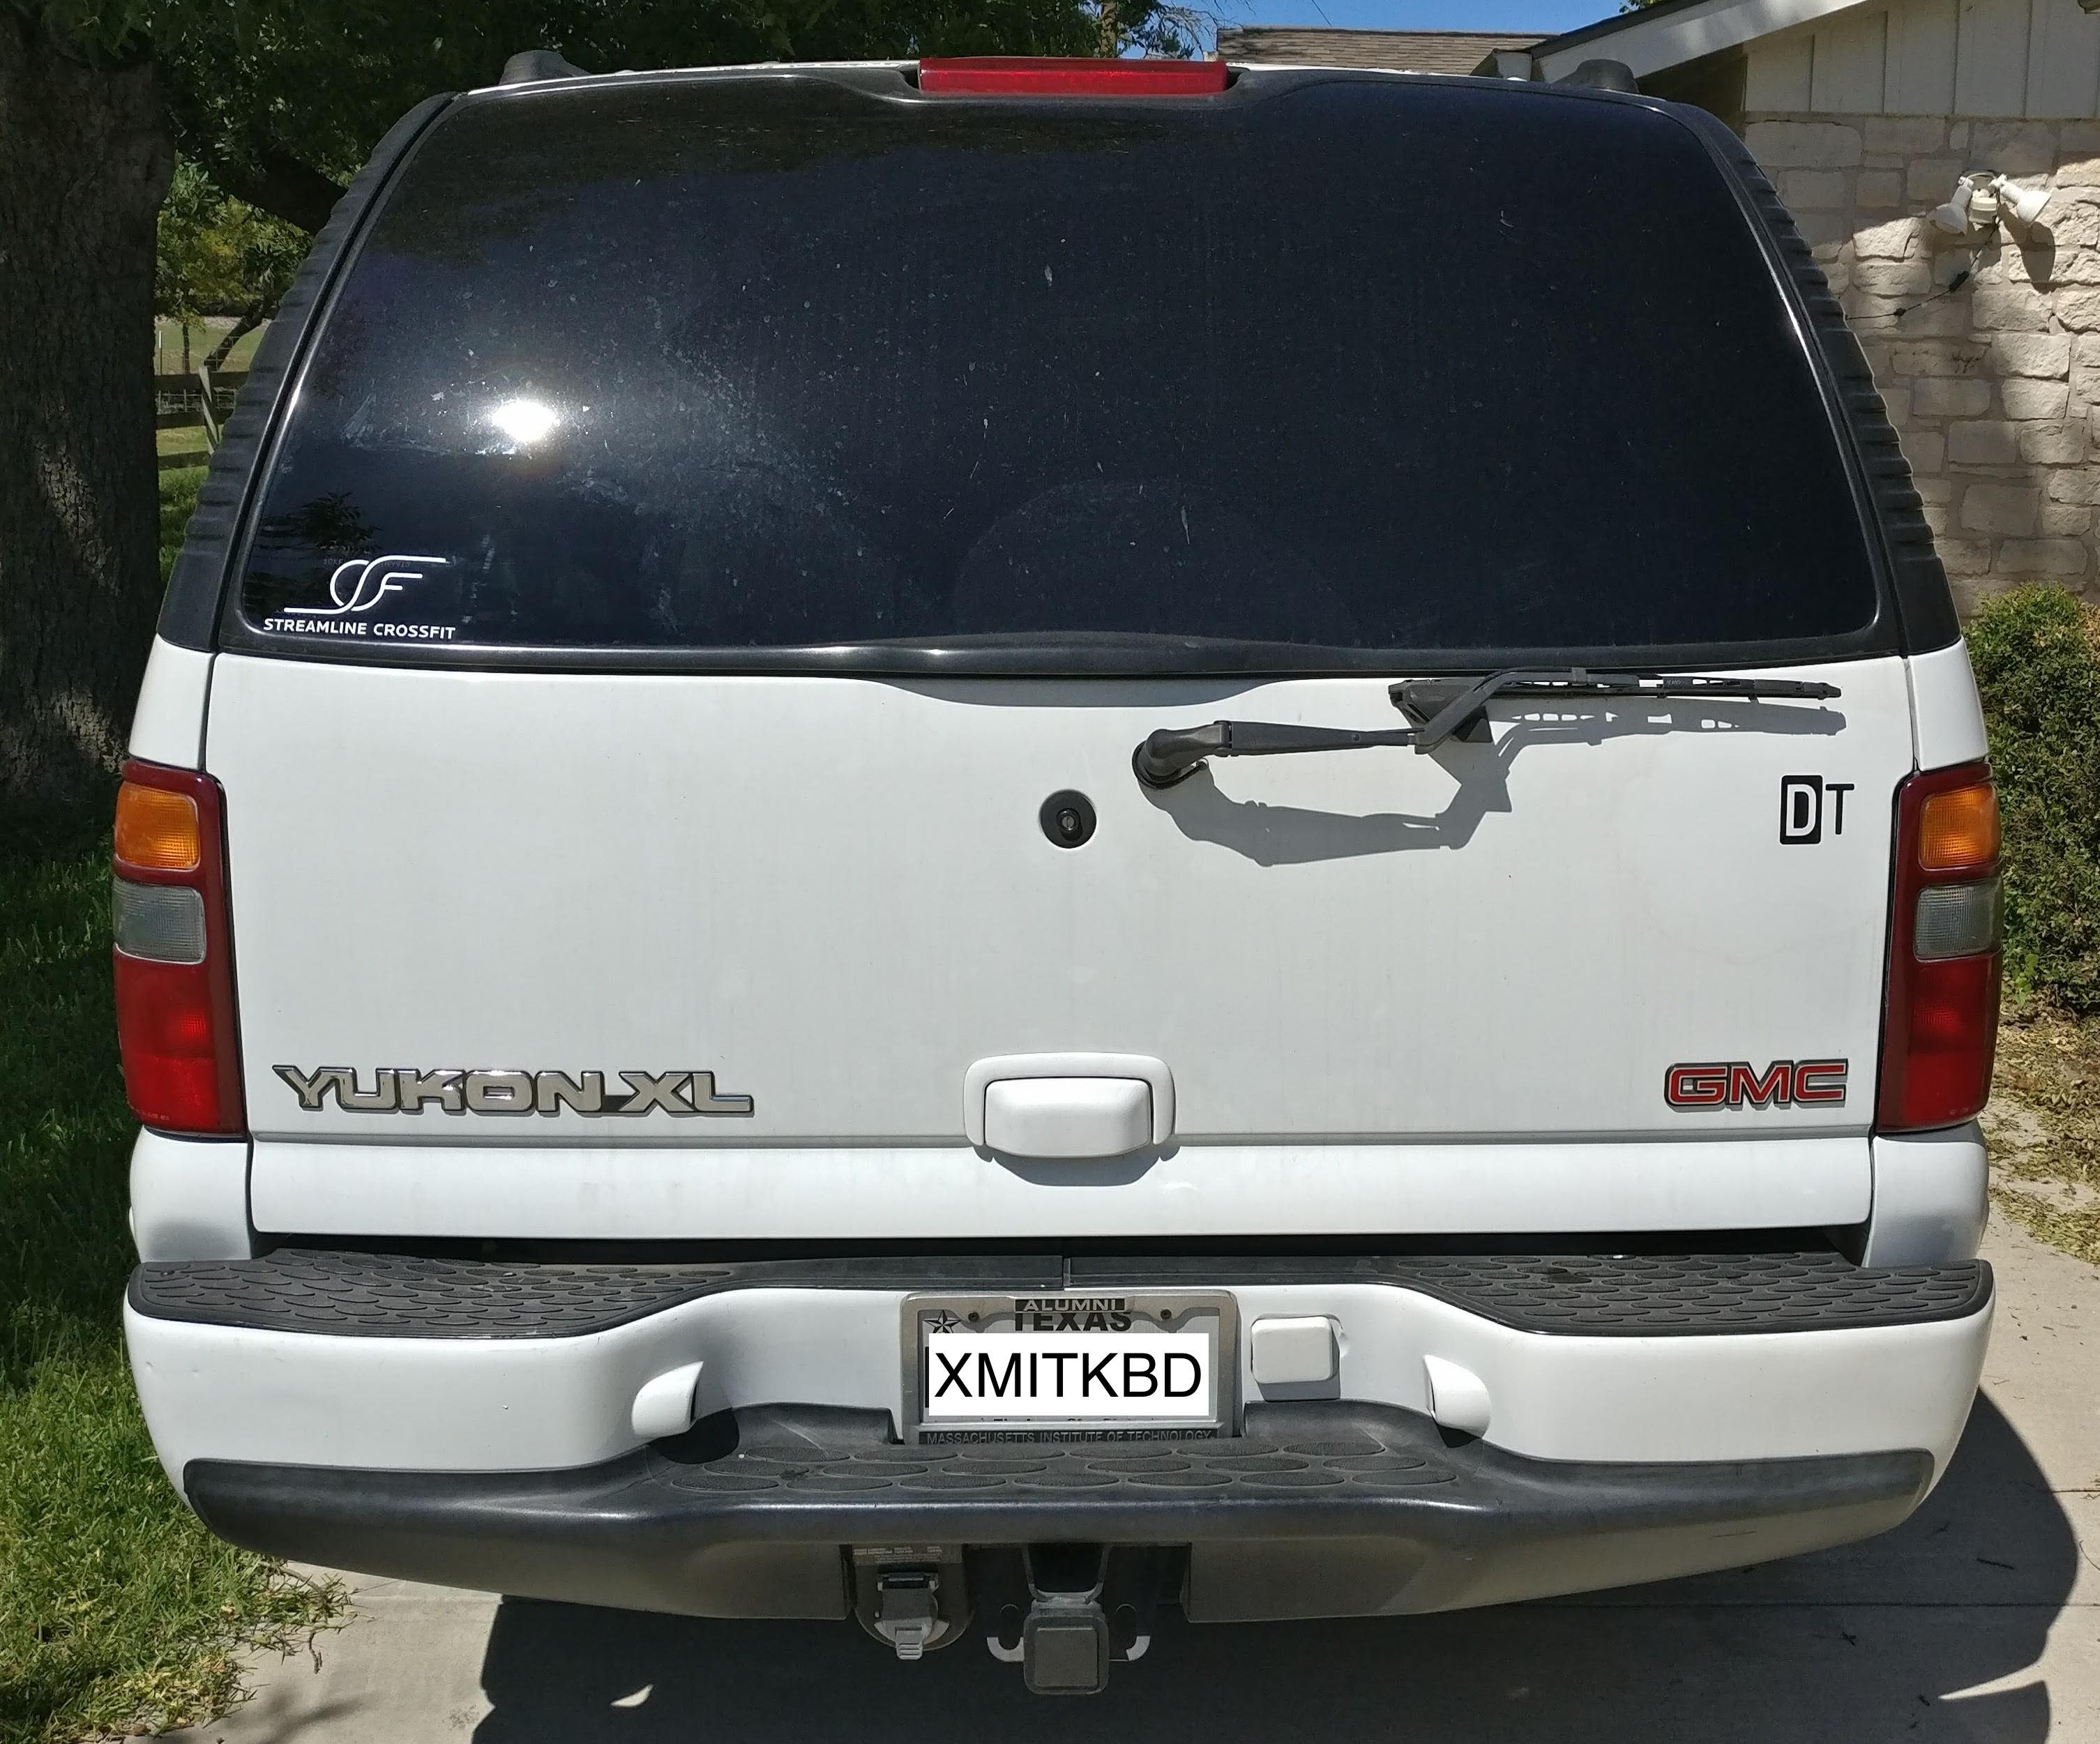 XMIT's Keyboard Truck. Note the DT logo! License plate withheld.